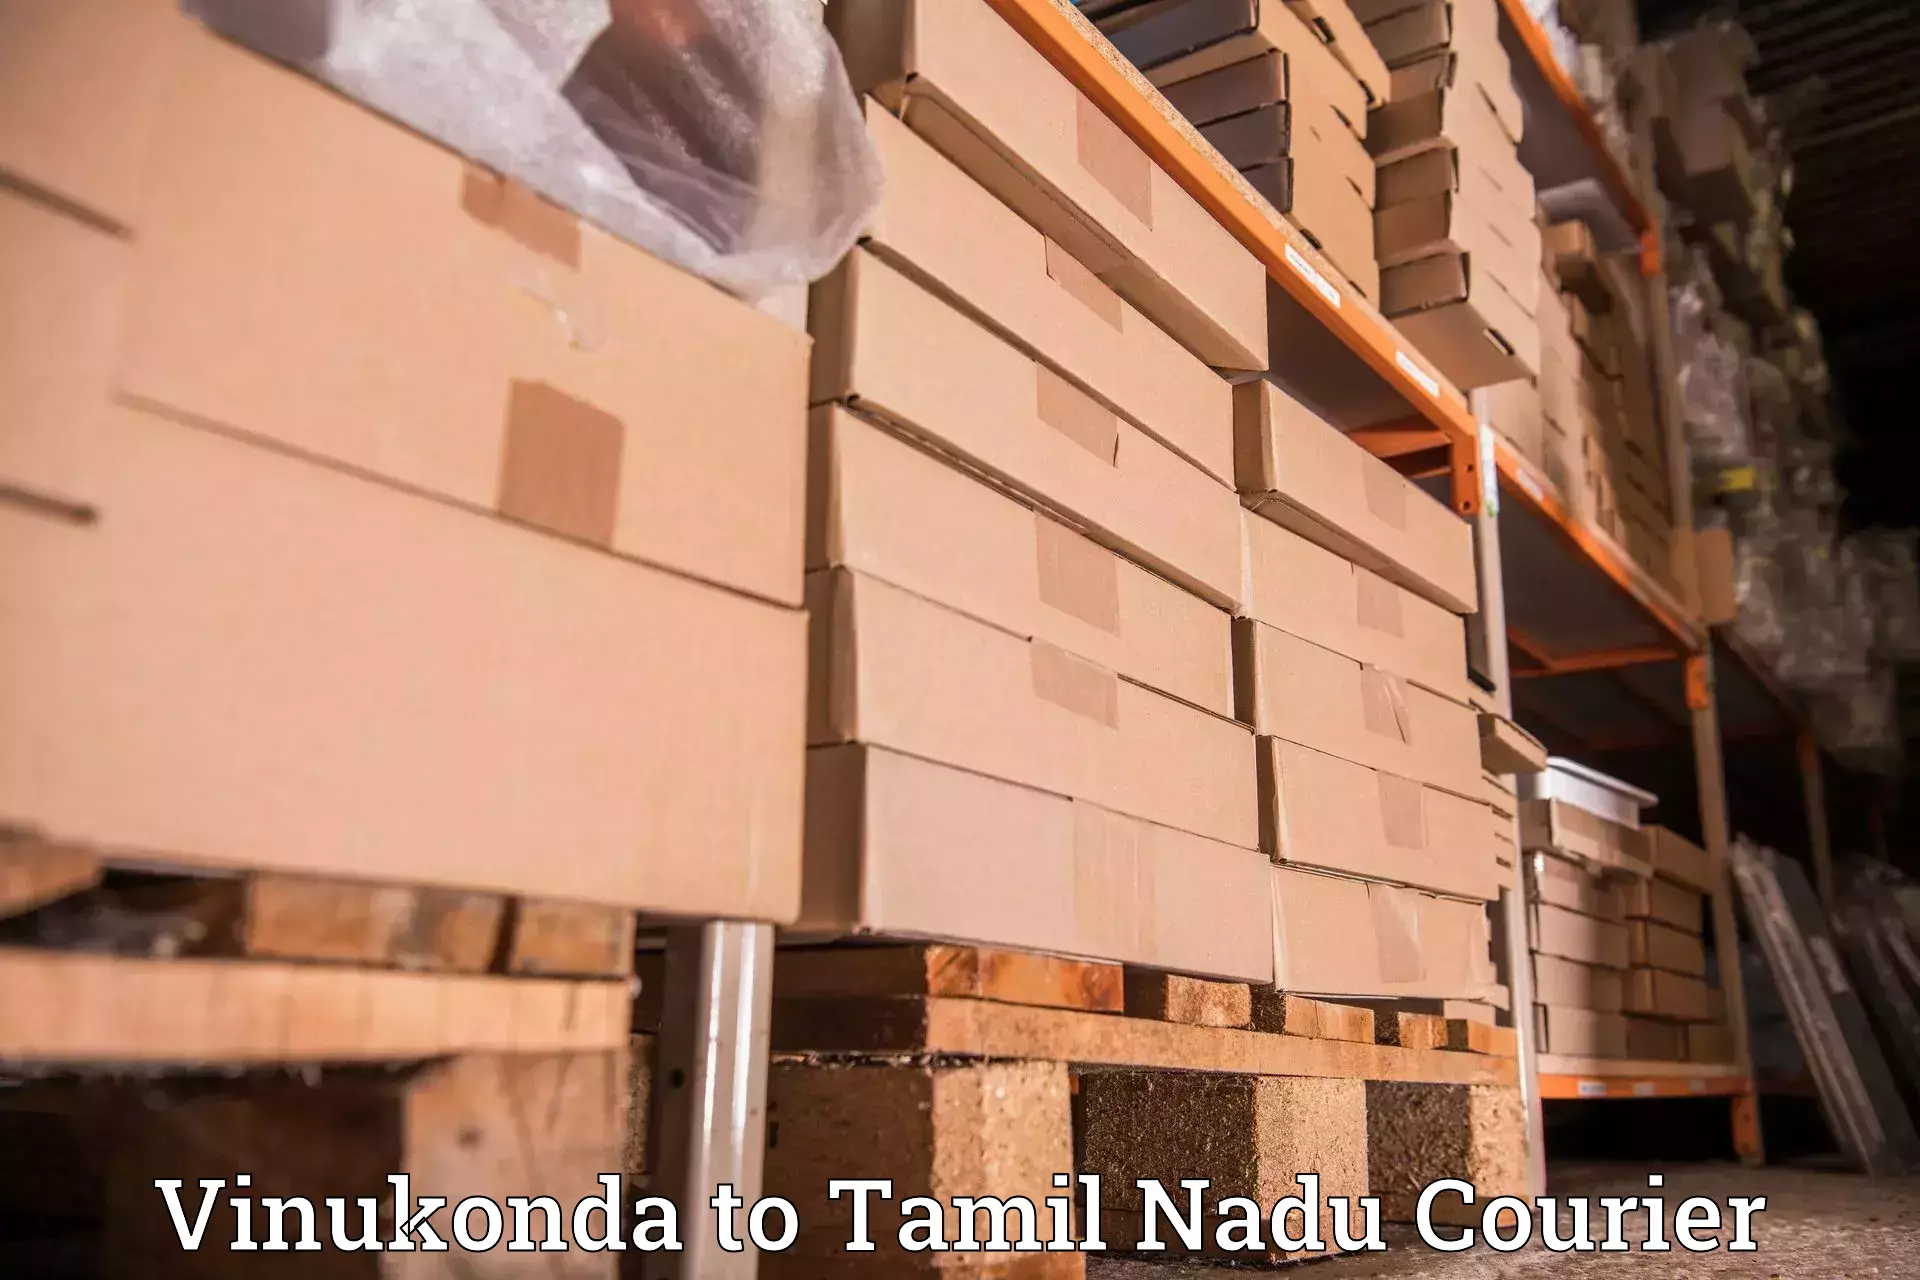 End-to-end delivery Vinukonda to Aranthangi